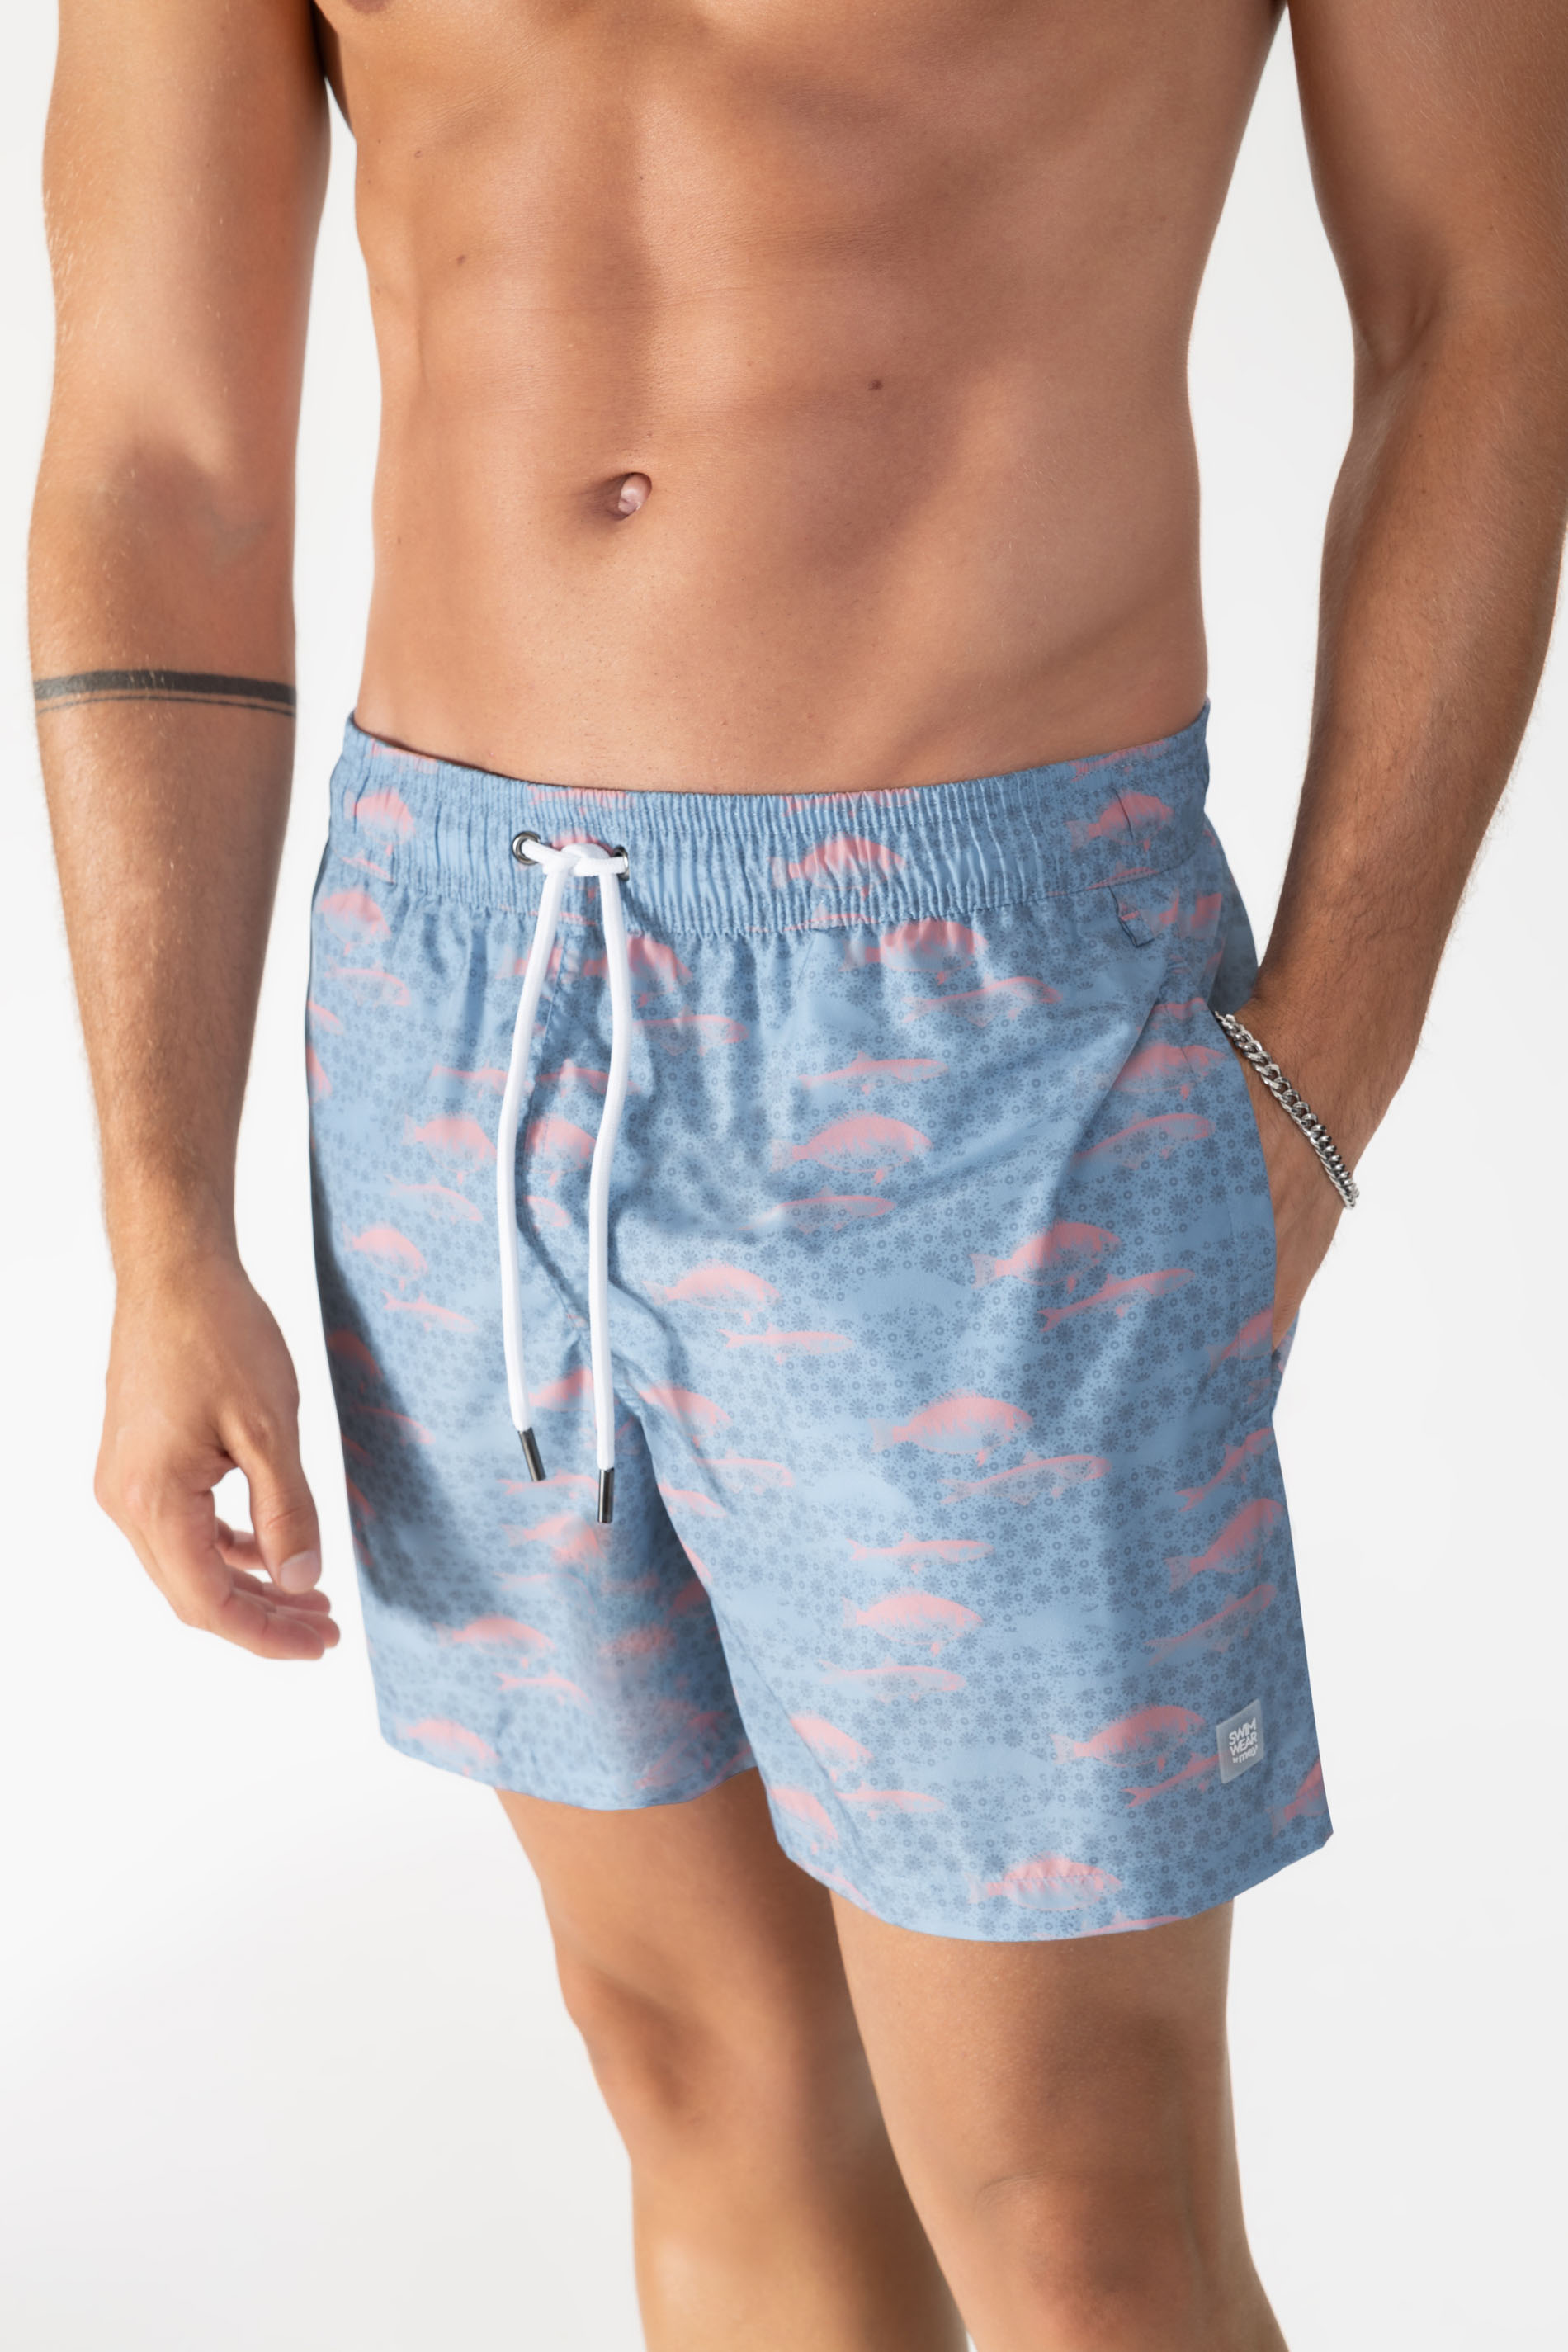 Swim shorts Serie School of Fishes Detail View 01 | mey®